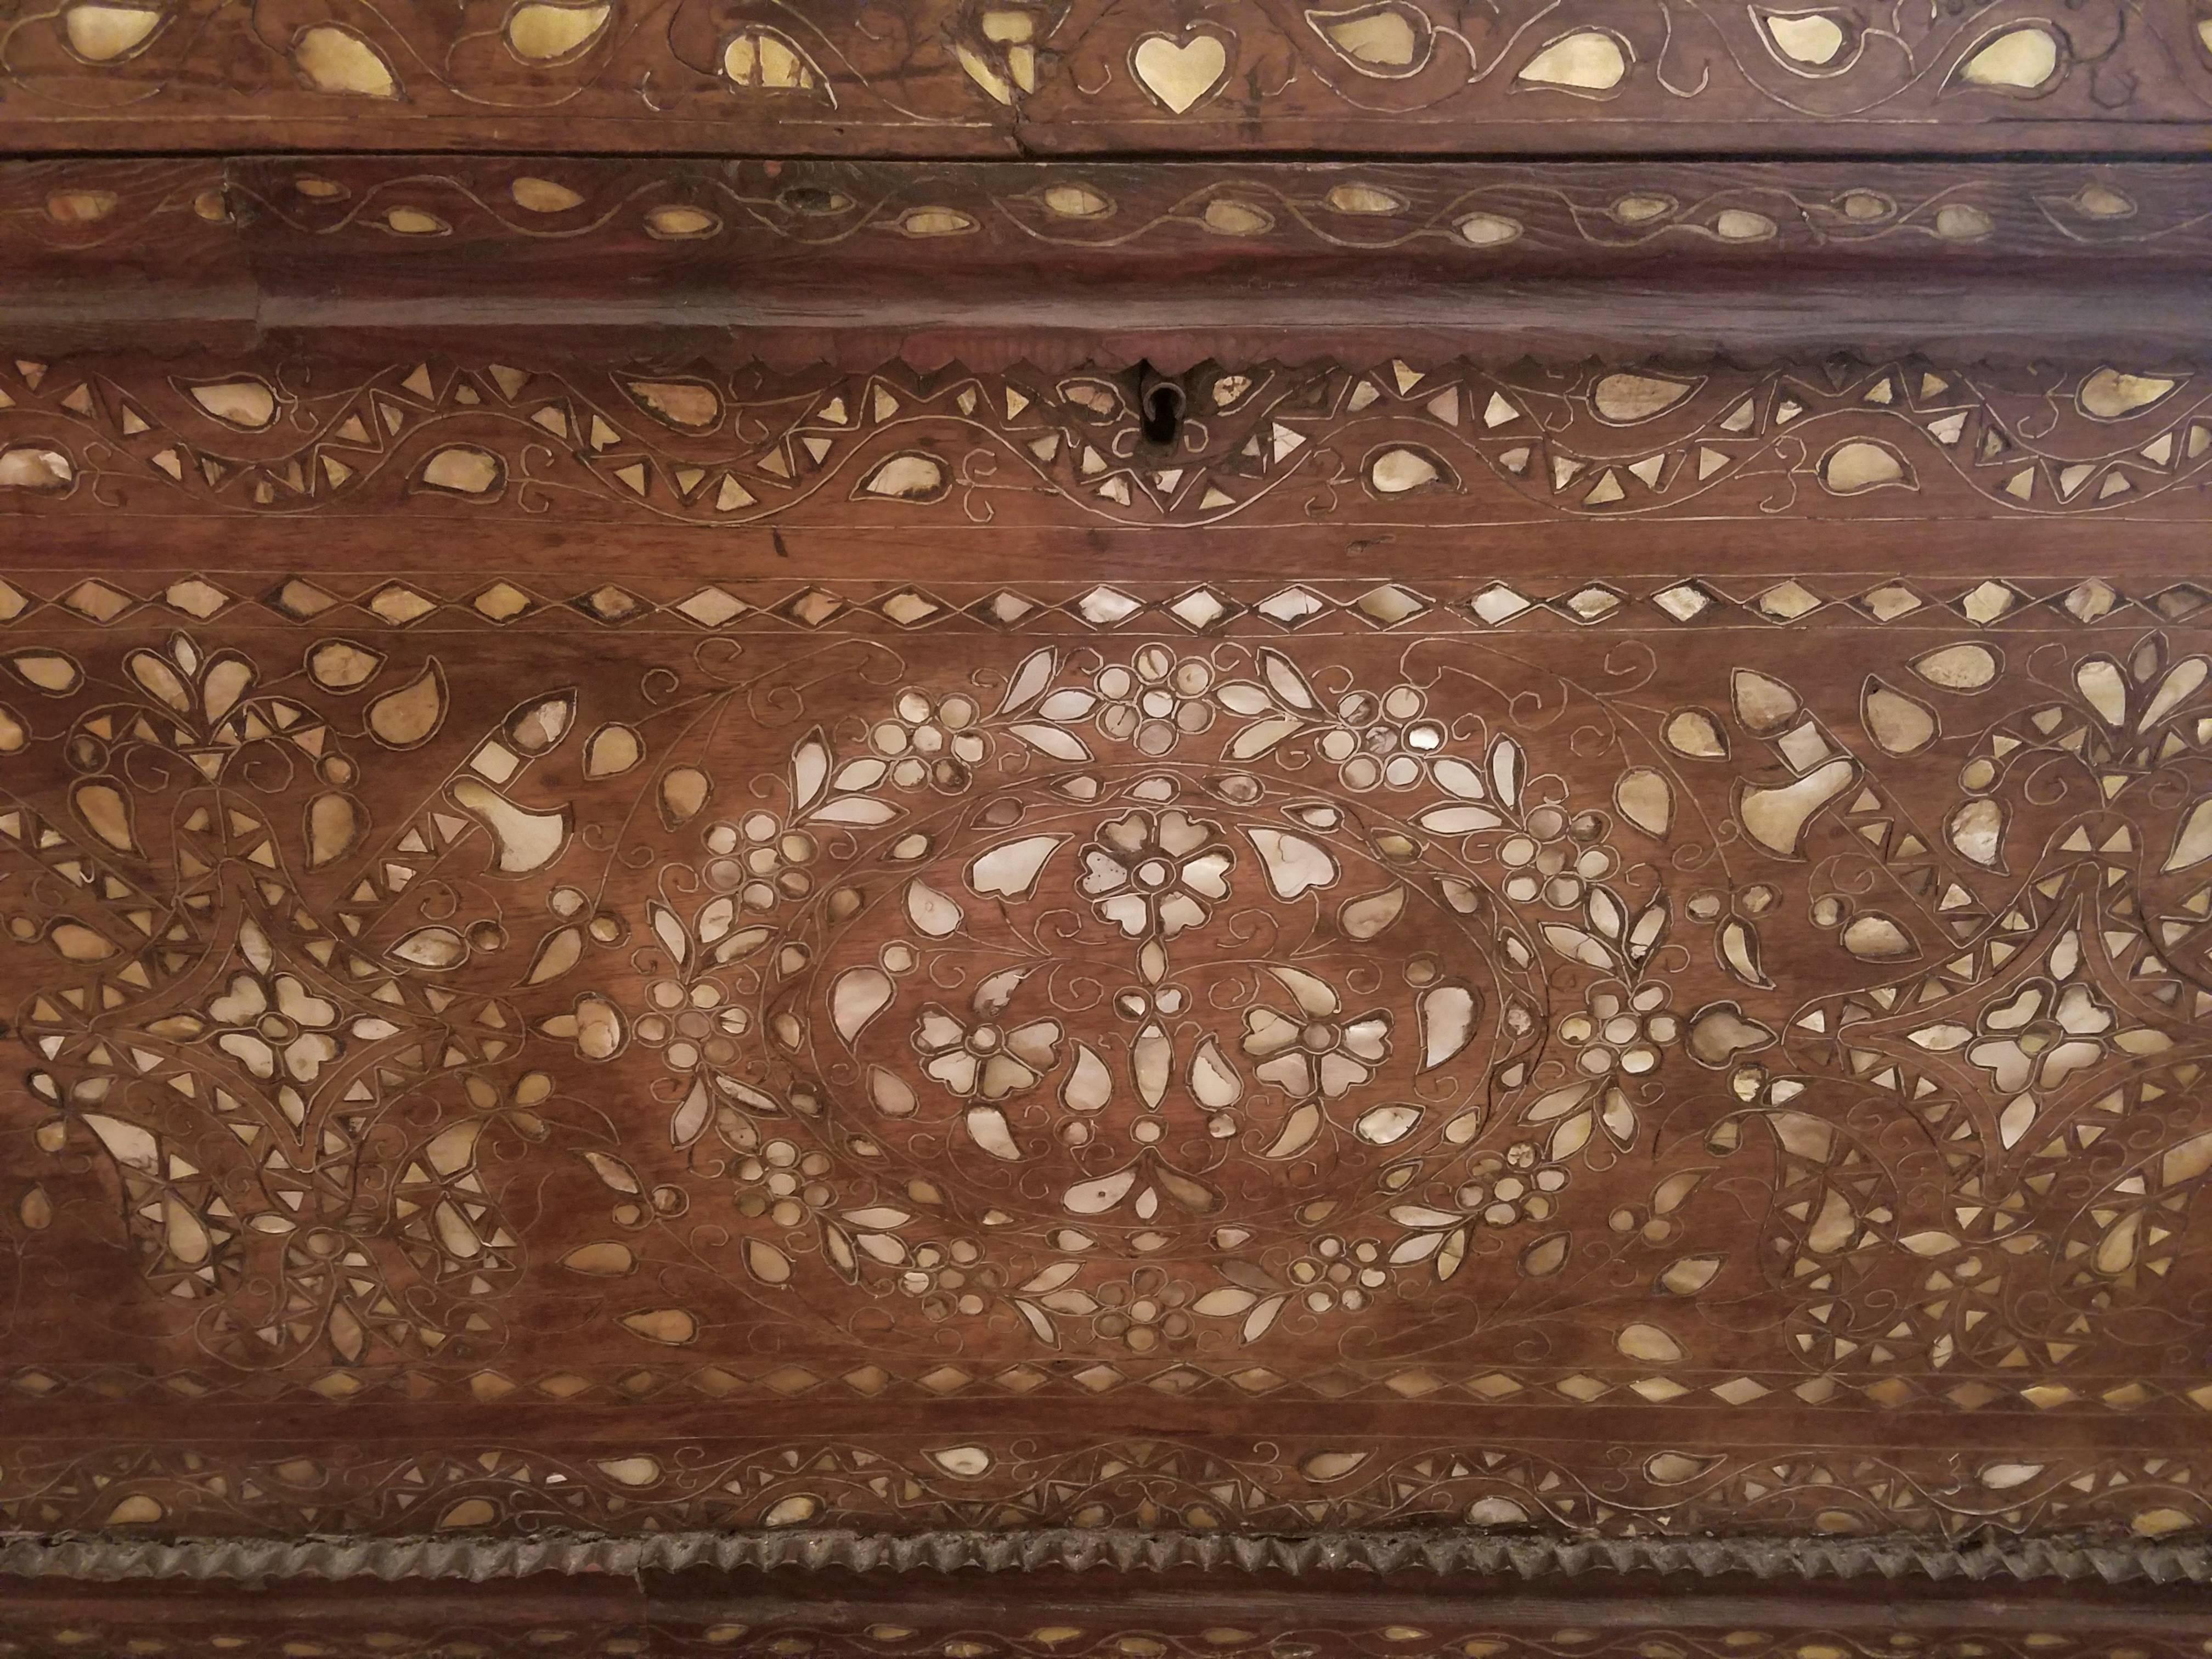 A large 19th century Syrian trunk profusely inlaid with mother-of-pearl and metal strapping on the front with sparser design on the sides, the back unadorned, the hinged top lifts to a spacious interior with two shallow open side sections each 4.5